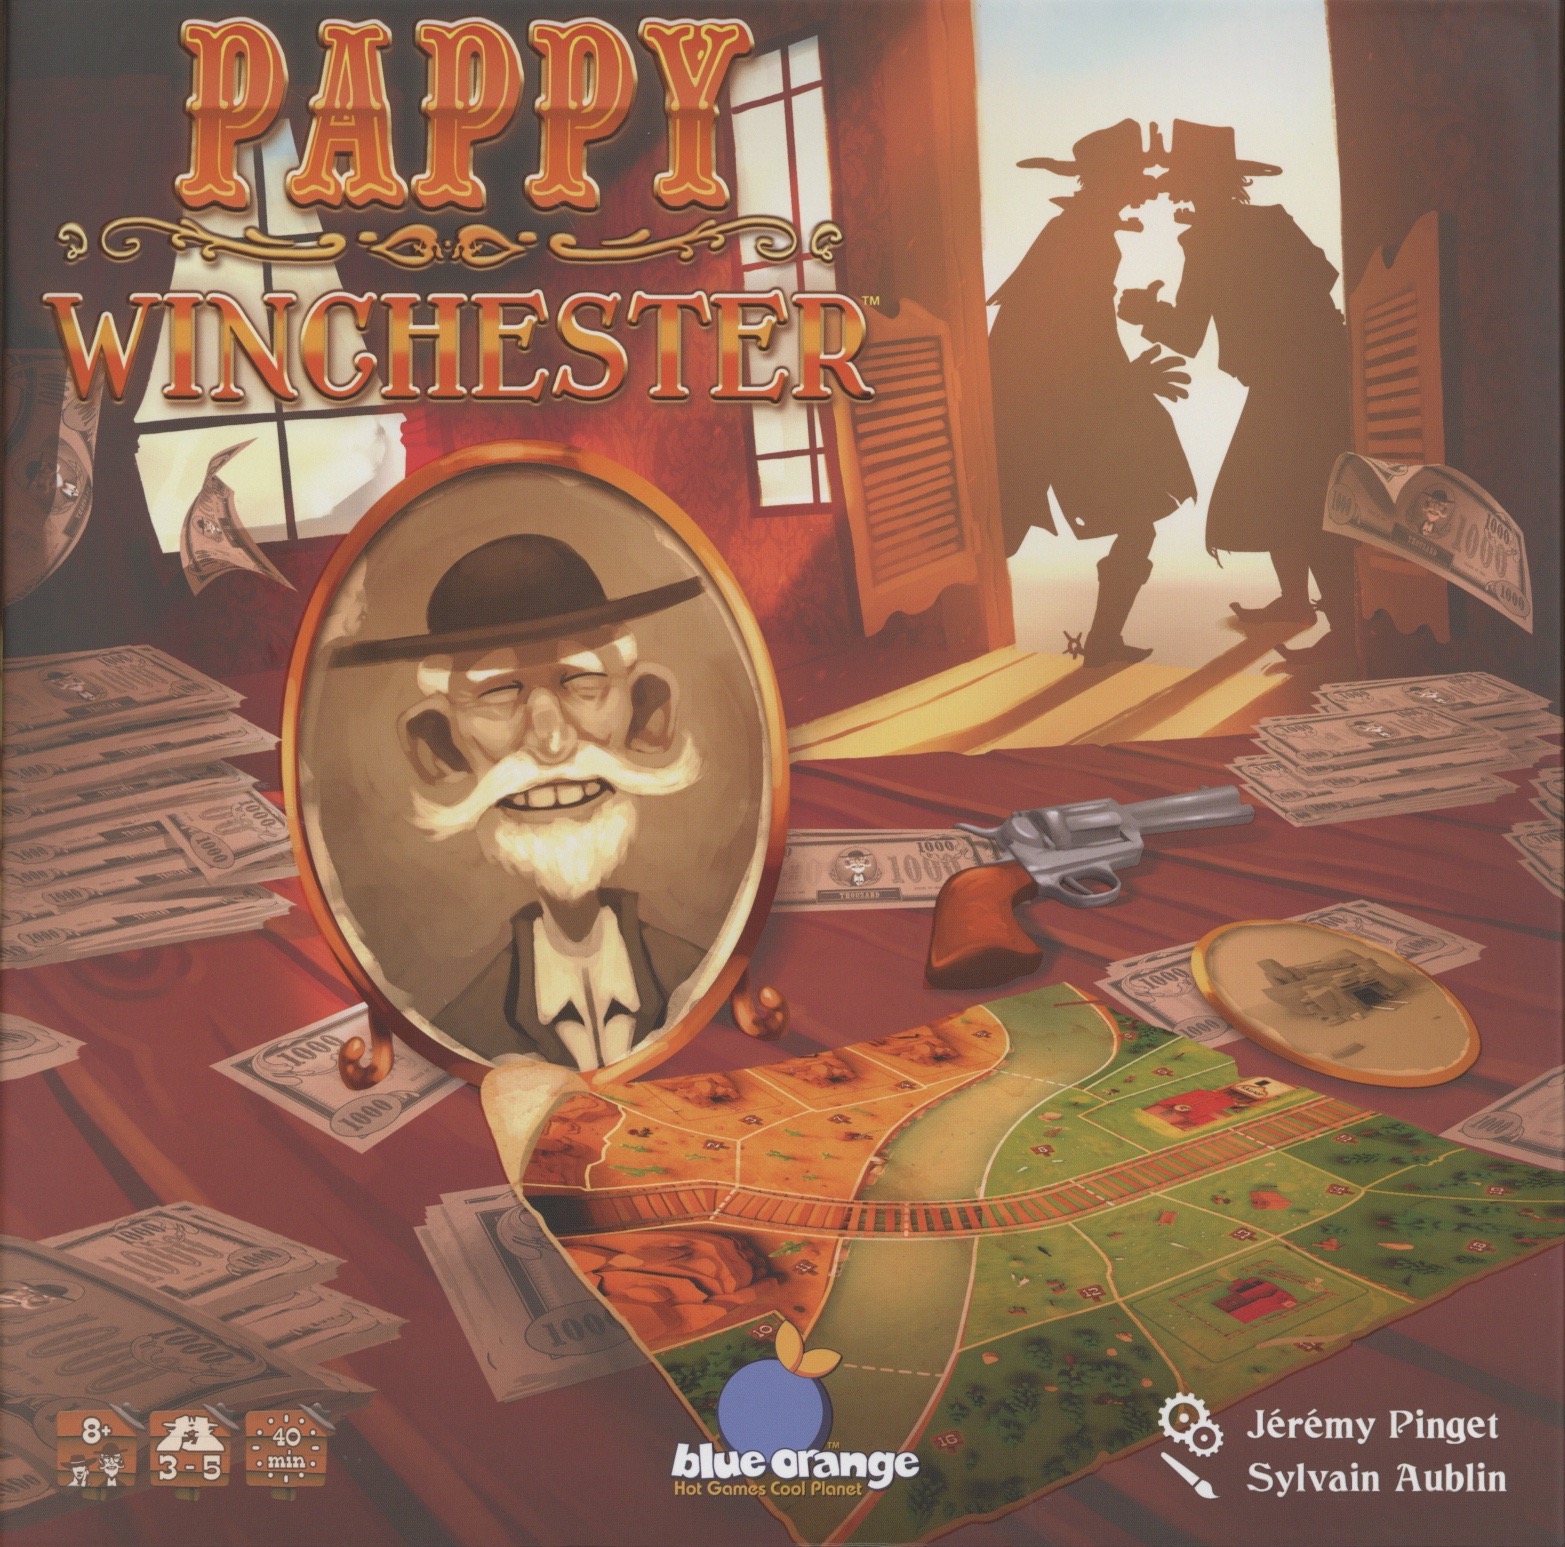 Pappy Winchester